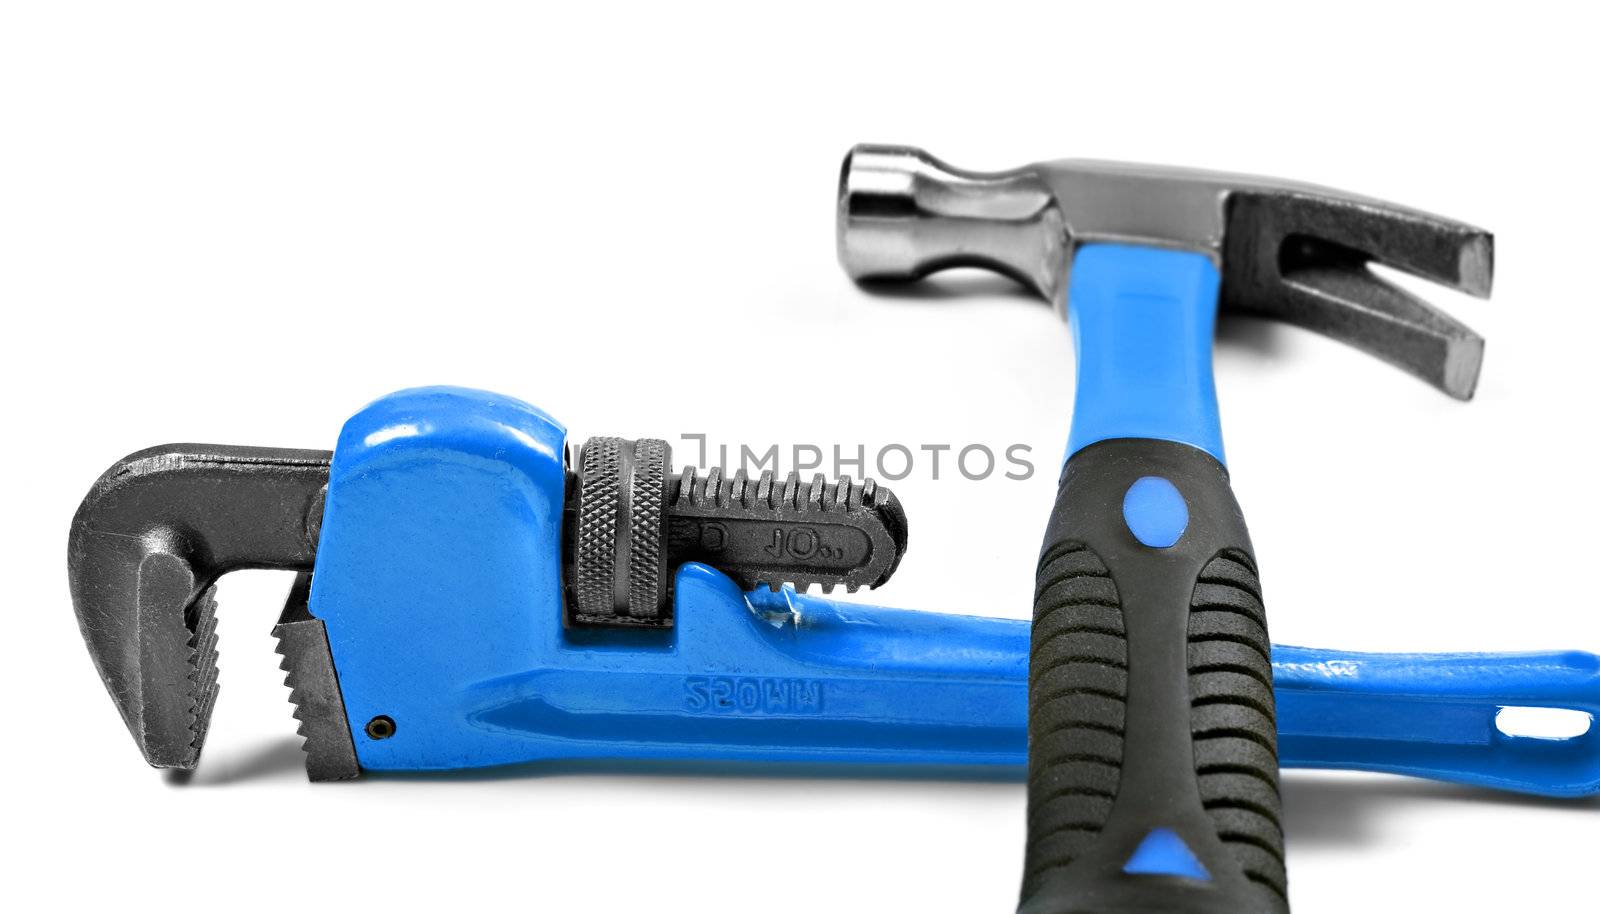 New hammer and wrench on a pure white background with space for text by tish1